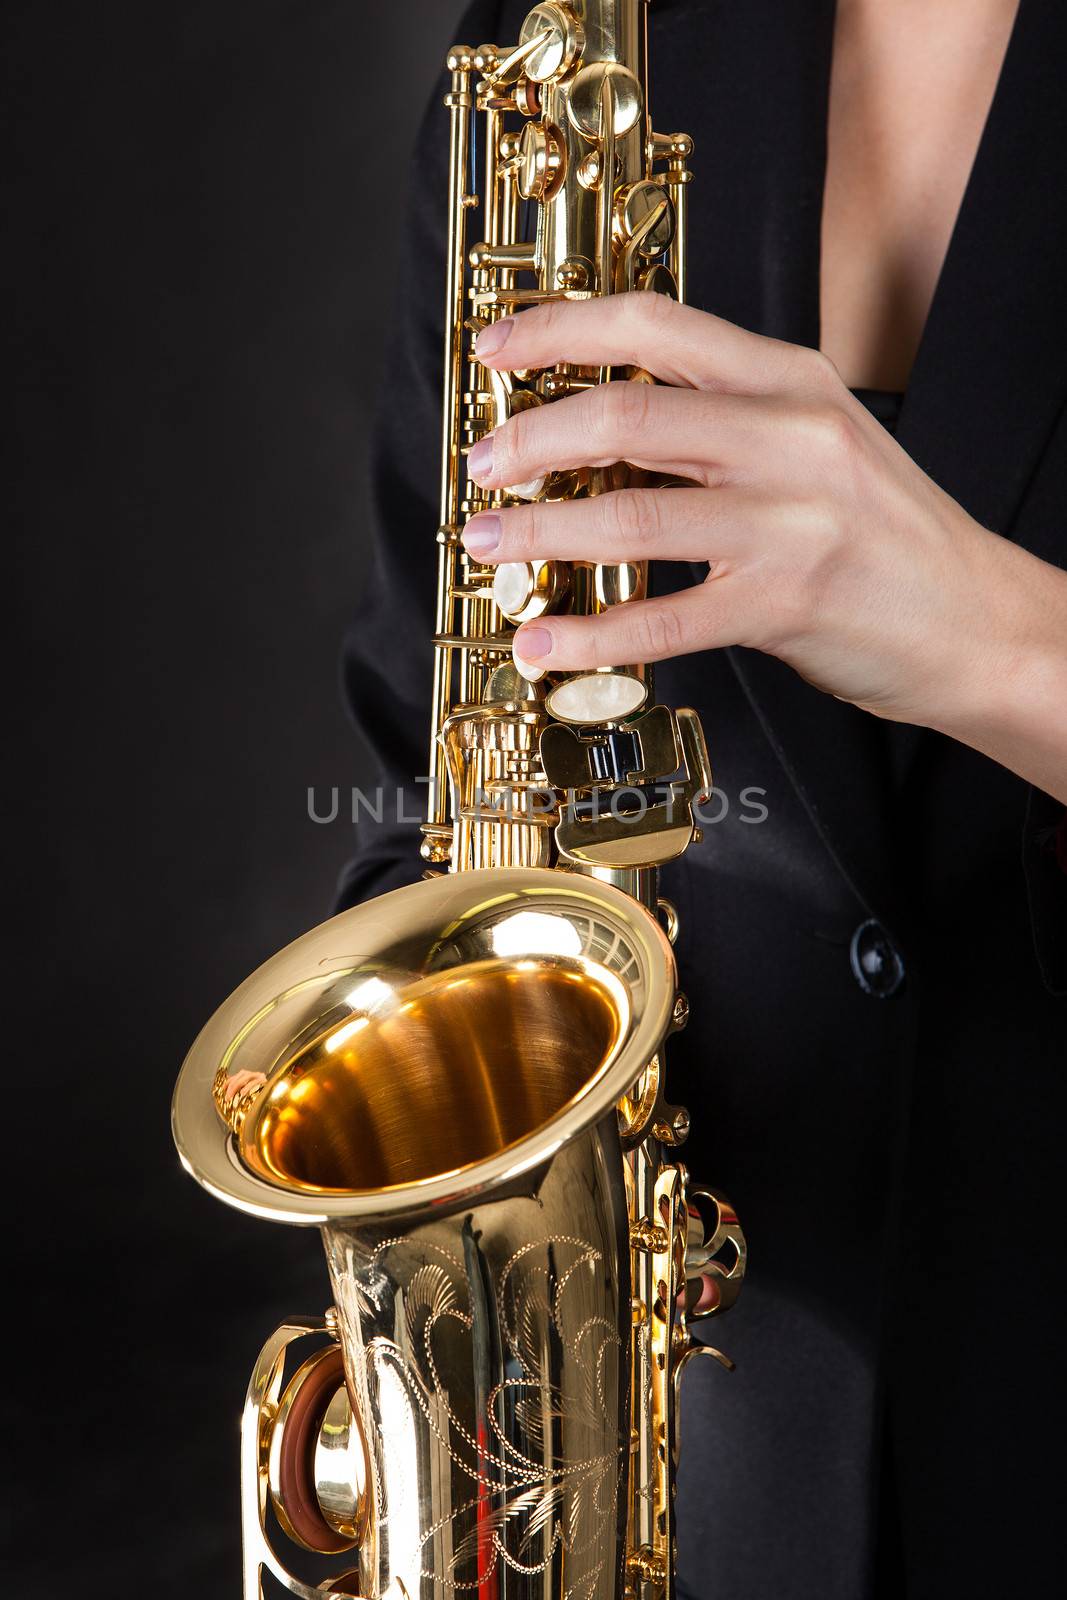 Beautiful young woman playing saxophone over black background